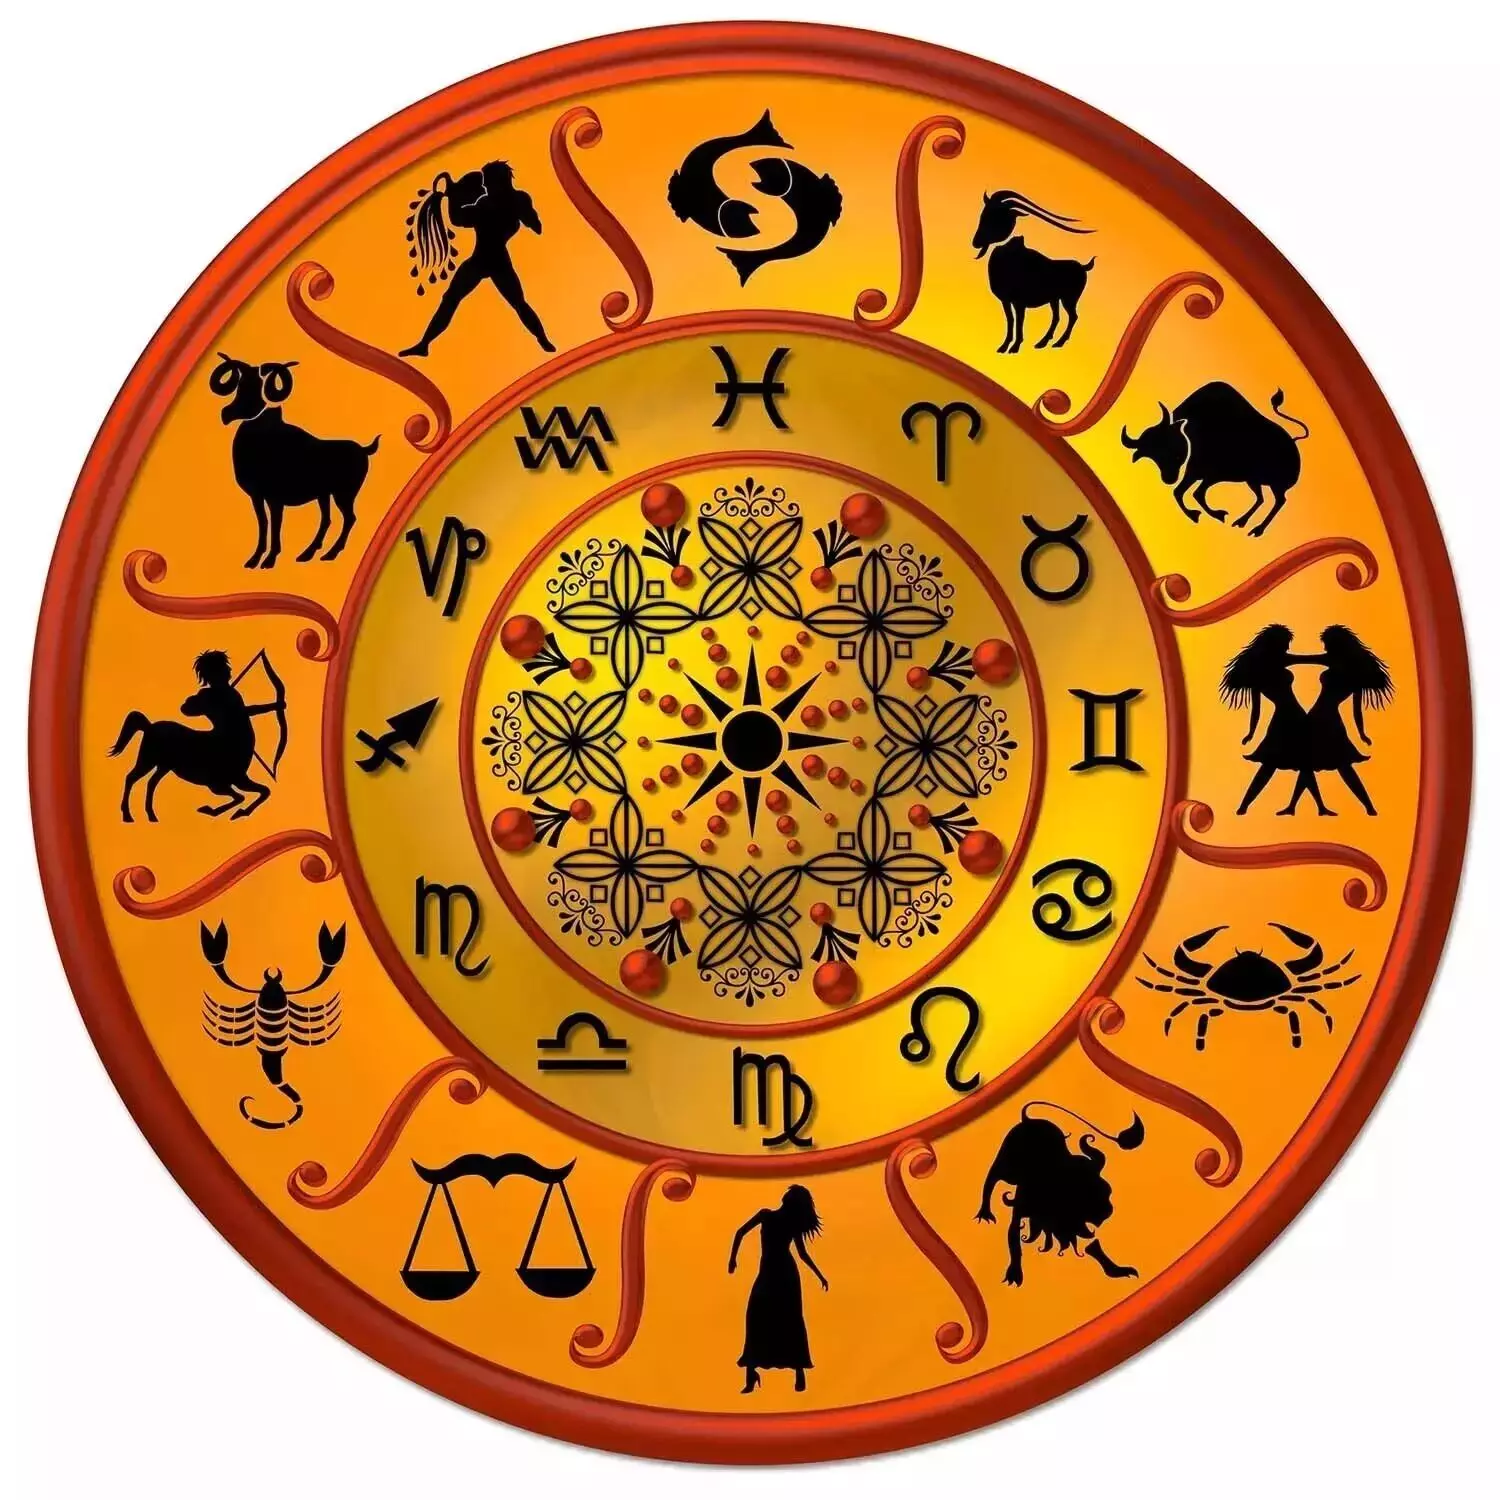 01 February  – Know your todays horoscope